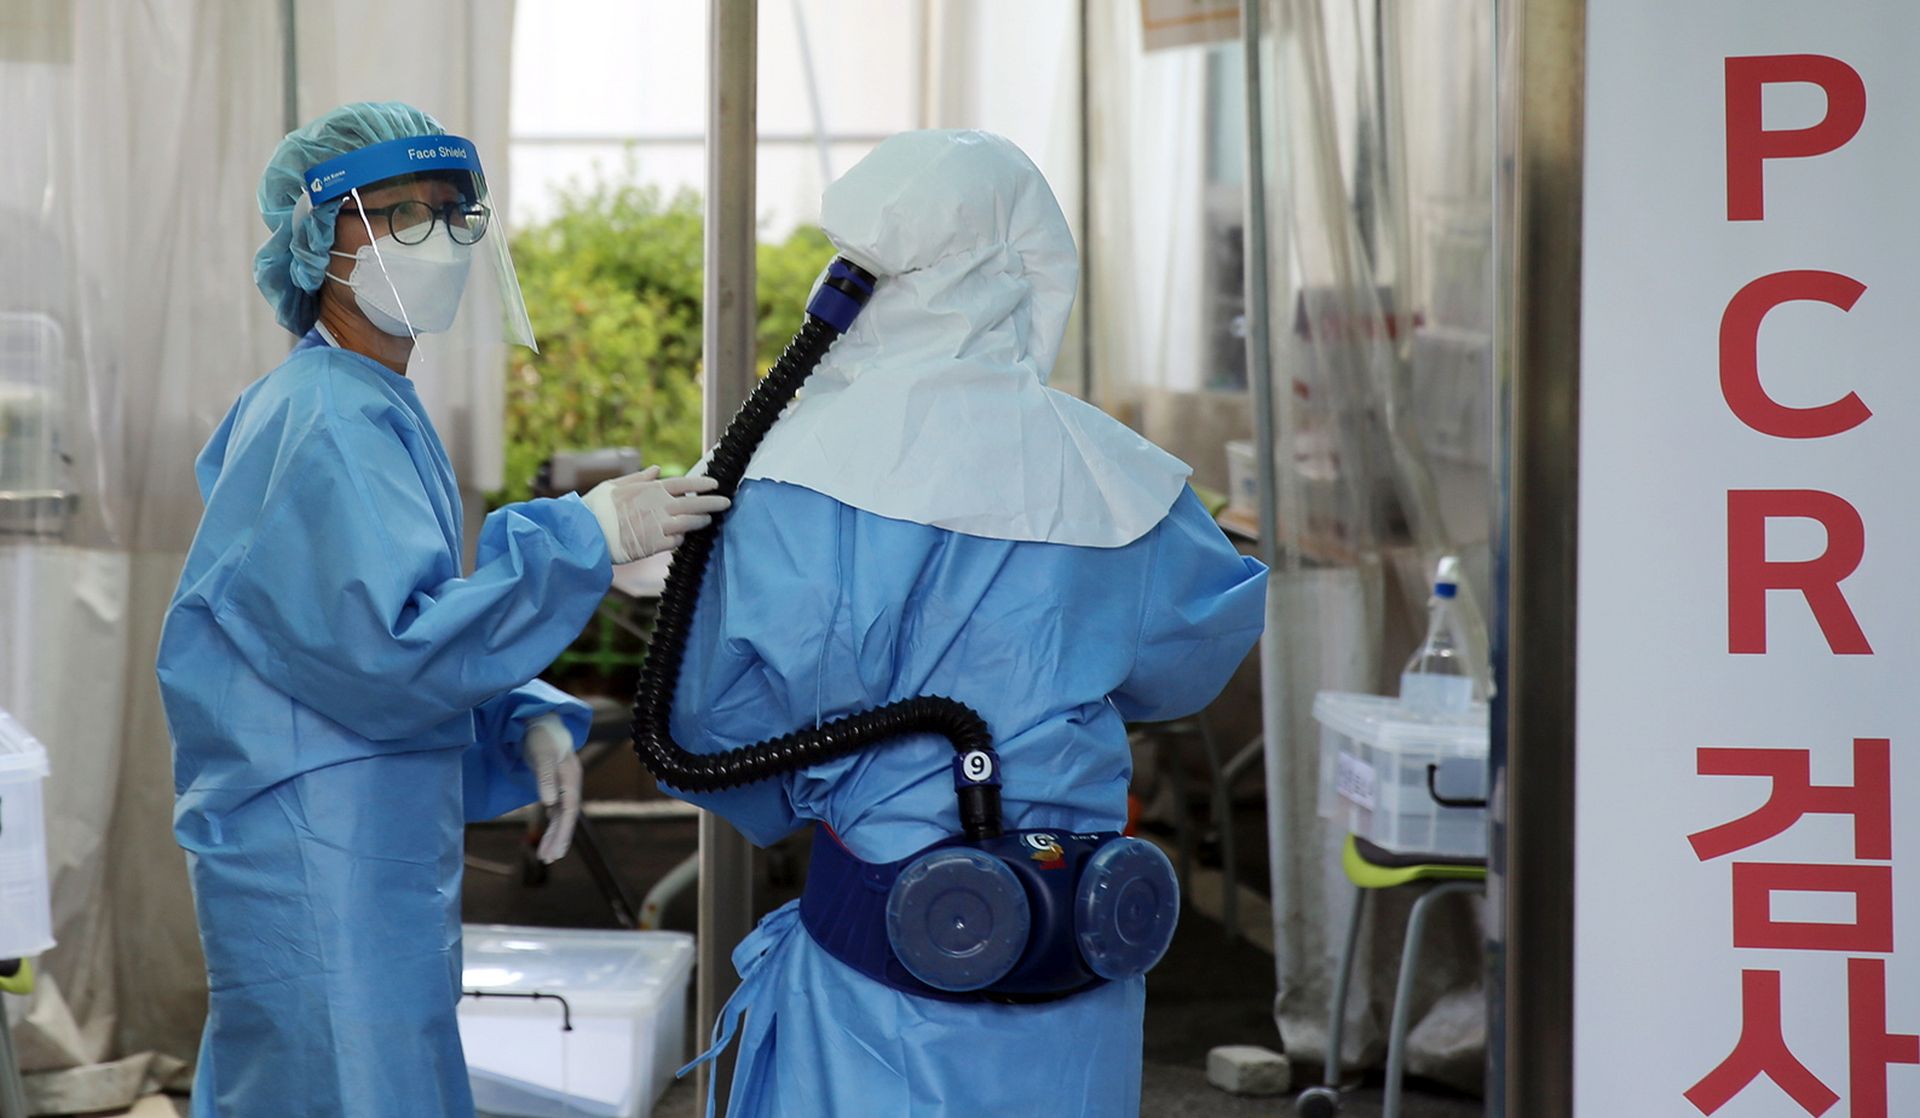 epa08613882 Medical workers wearing protective gear prepare to carry out COVID-19 tests at a makeshit clinic run by Konyang University Hospital in Daejeon, South Korea, 20 August 2020.  EPA/YONHAP SOUTH KOREA OUT